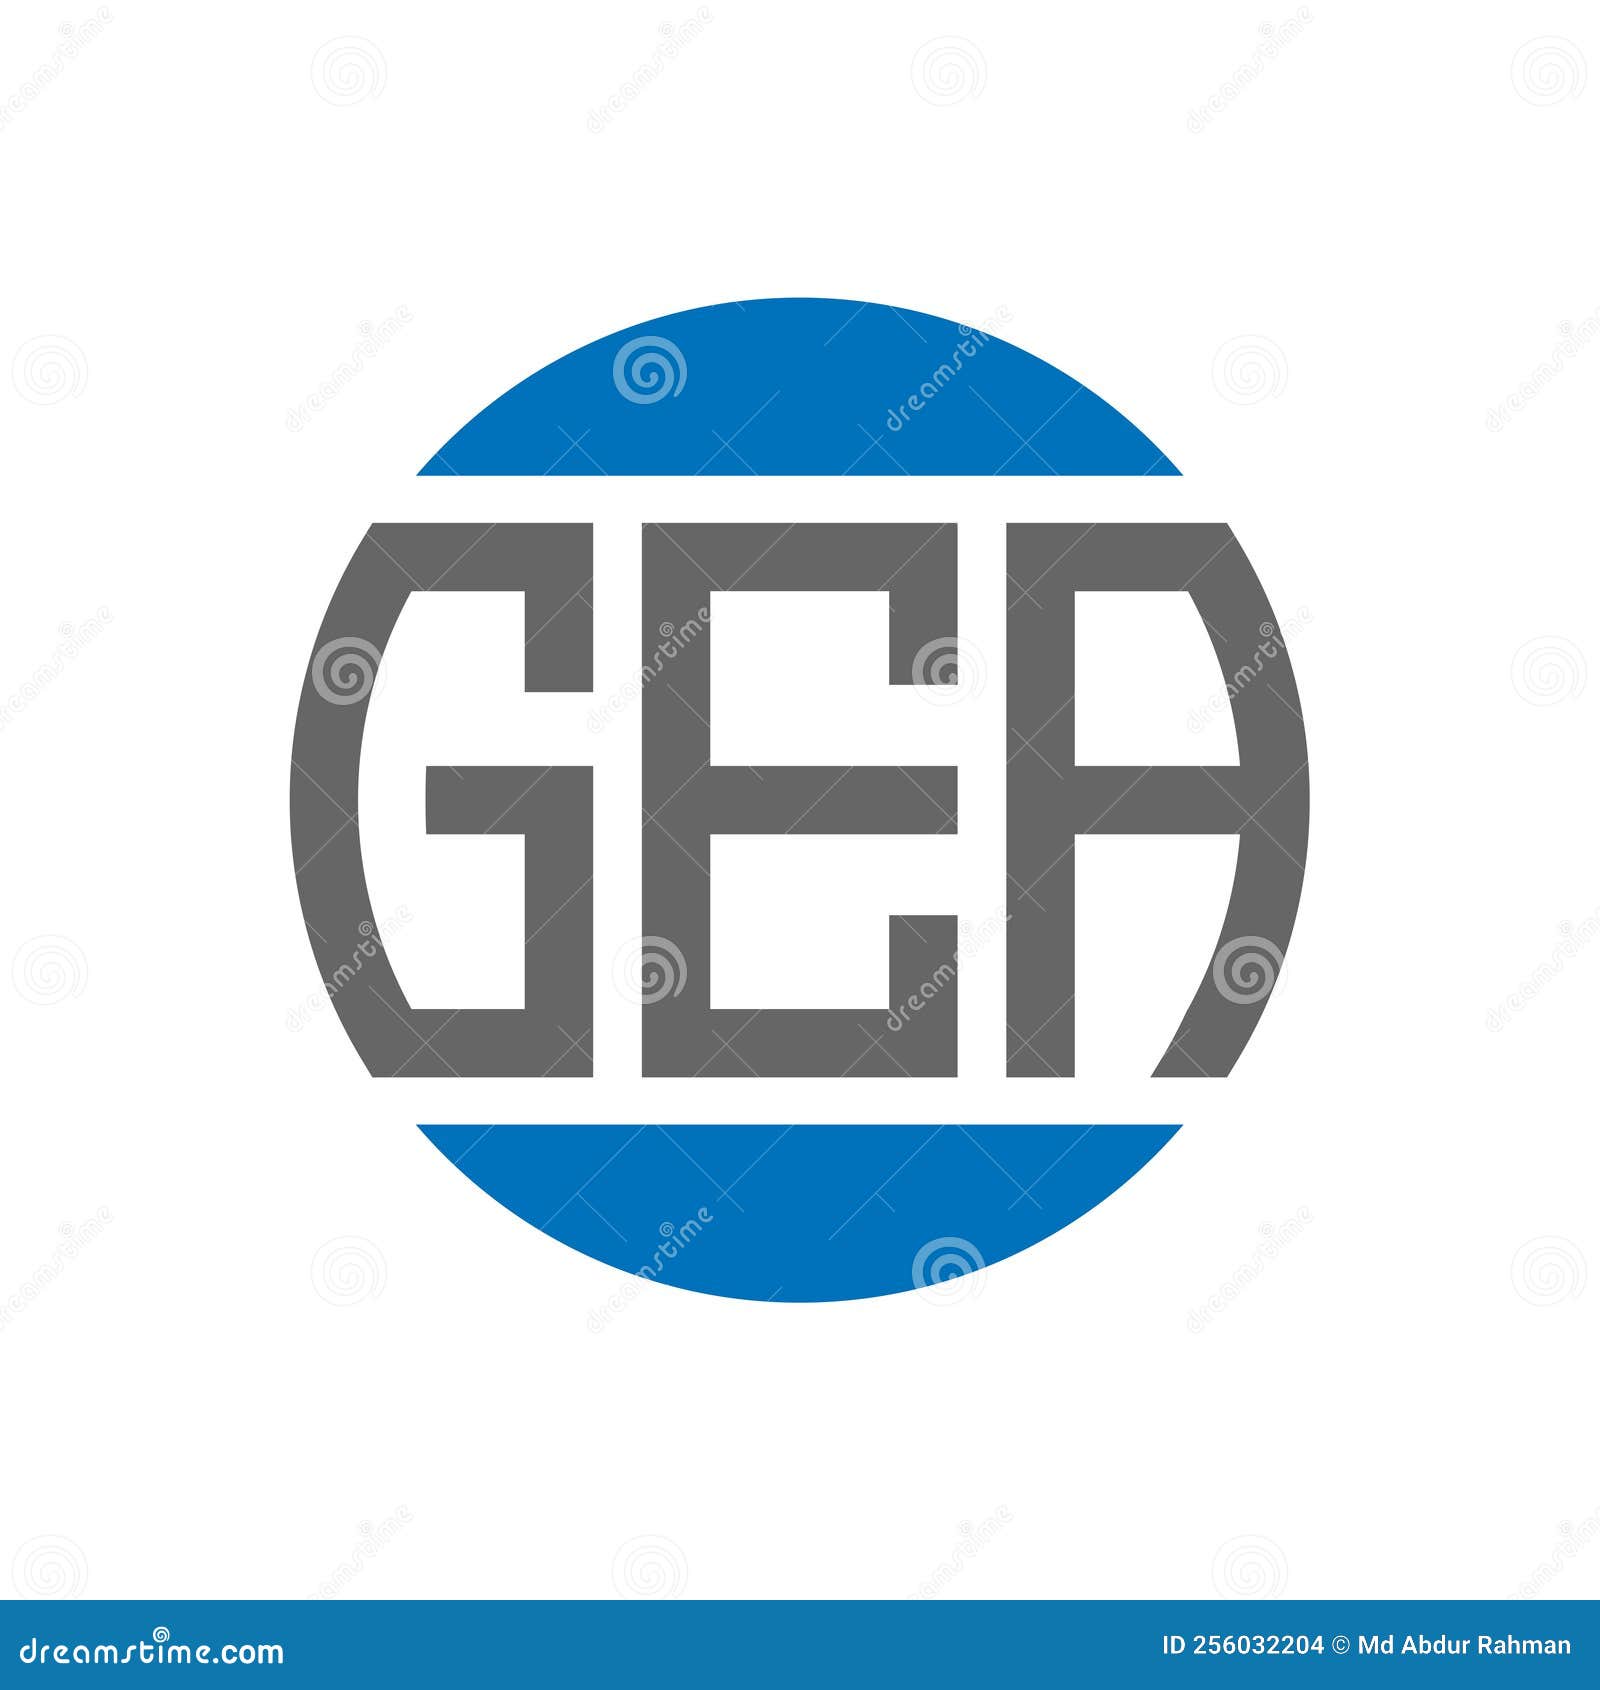 gea letter logo  on white background. gea creative initials circle logo concept. gea letter 